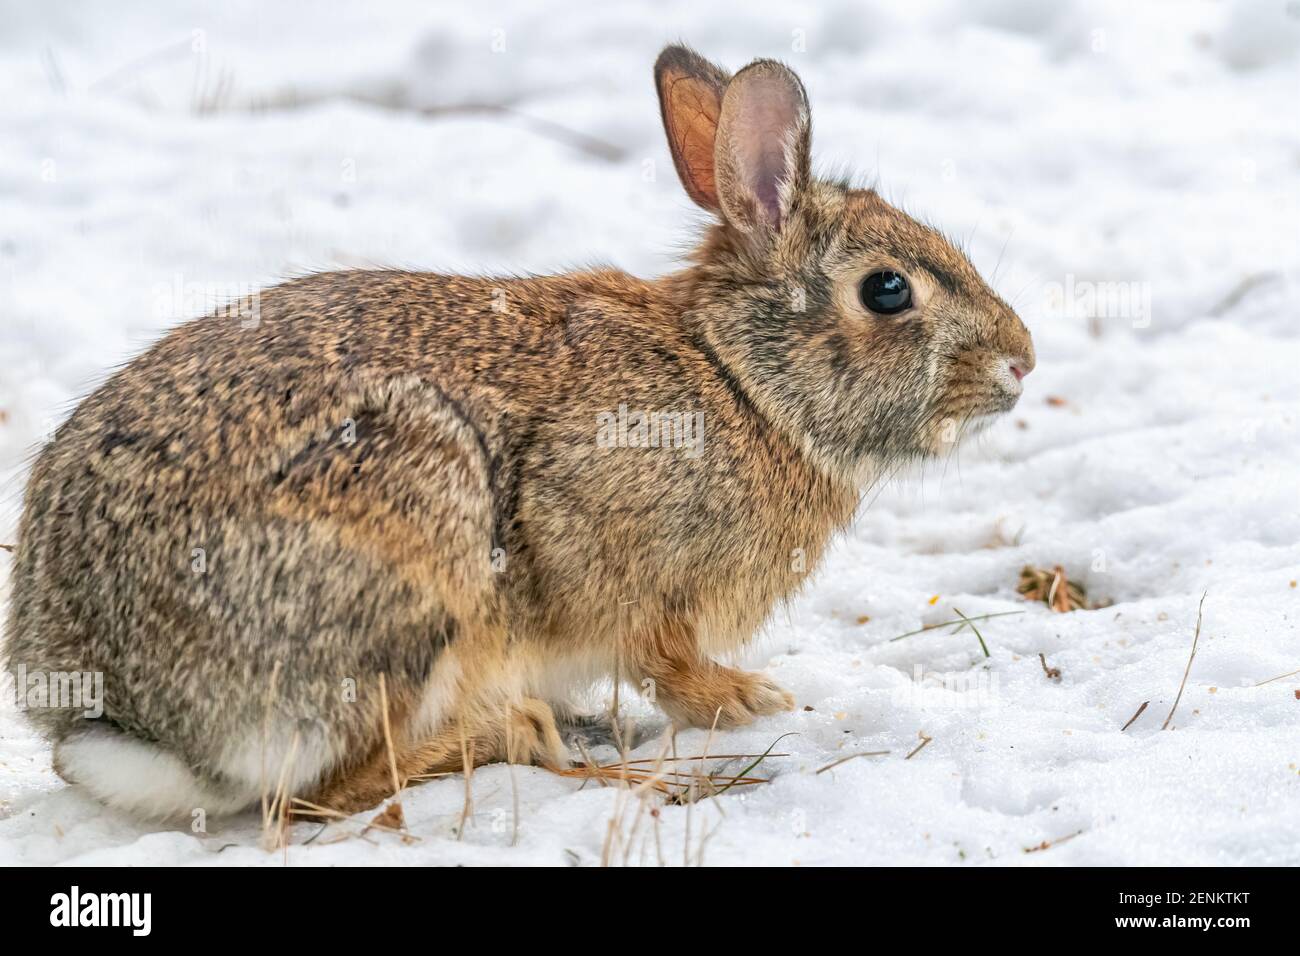 Close up side view of a young Eastern Cottontail Rabbit (Sylvilagus floridanus) standing in snow in the winter. Stock Photo